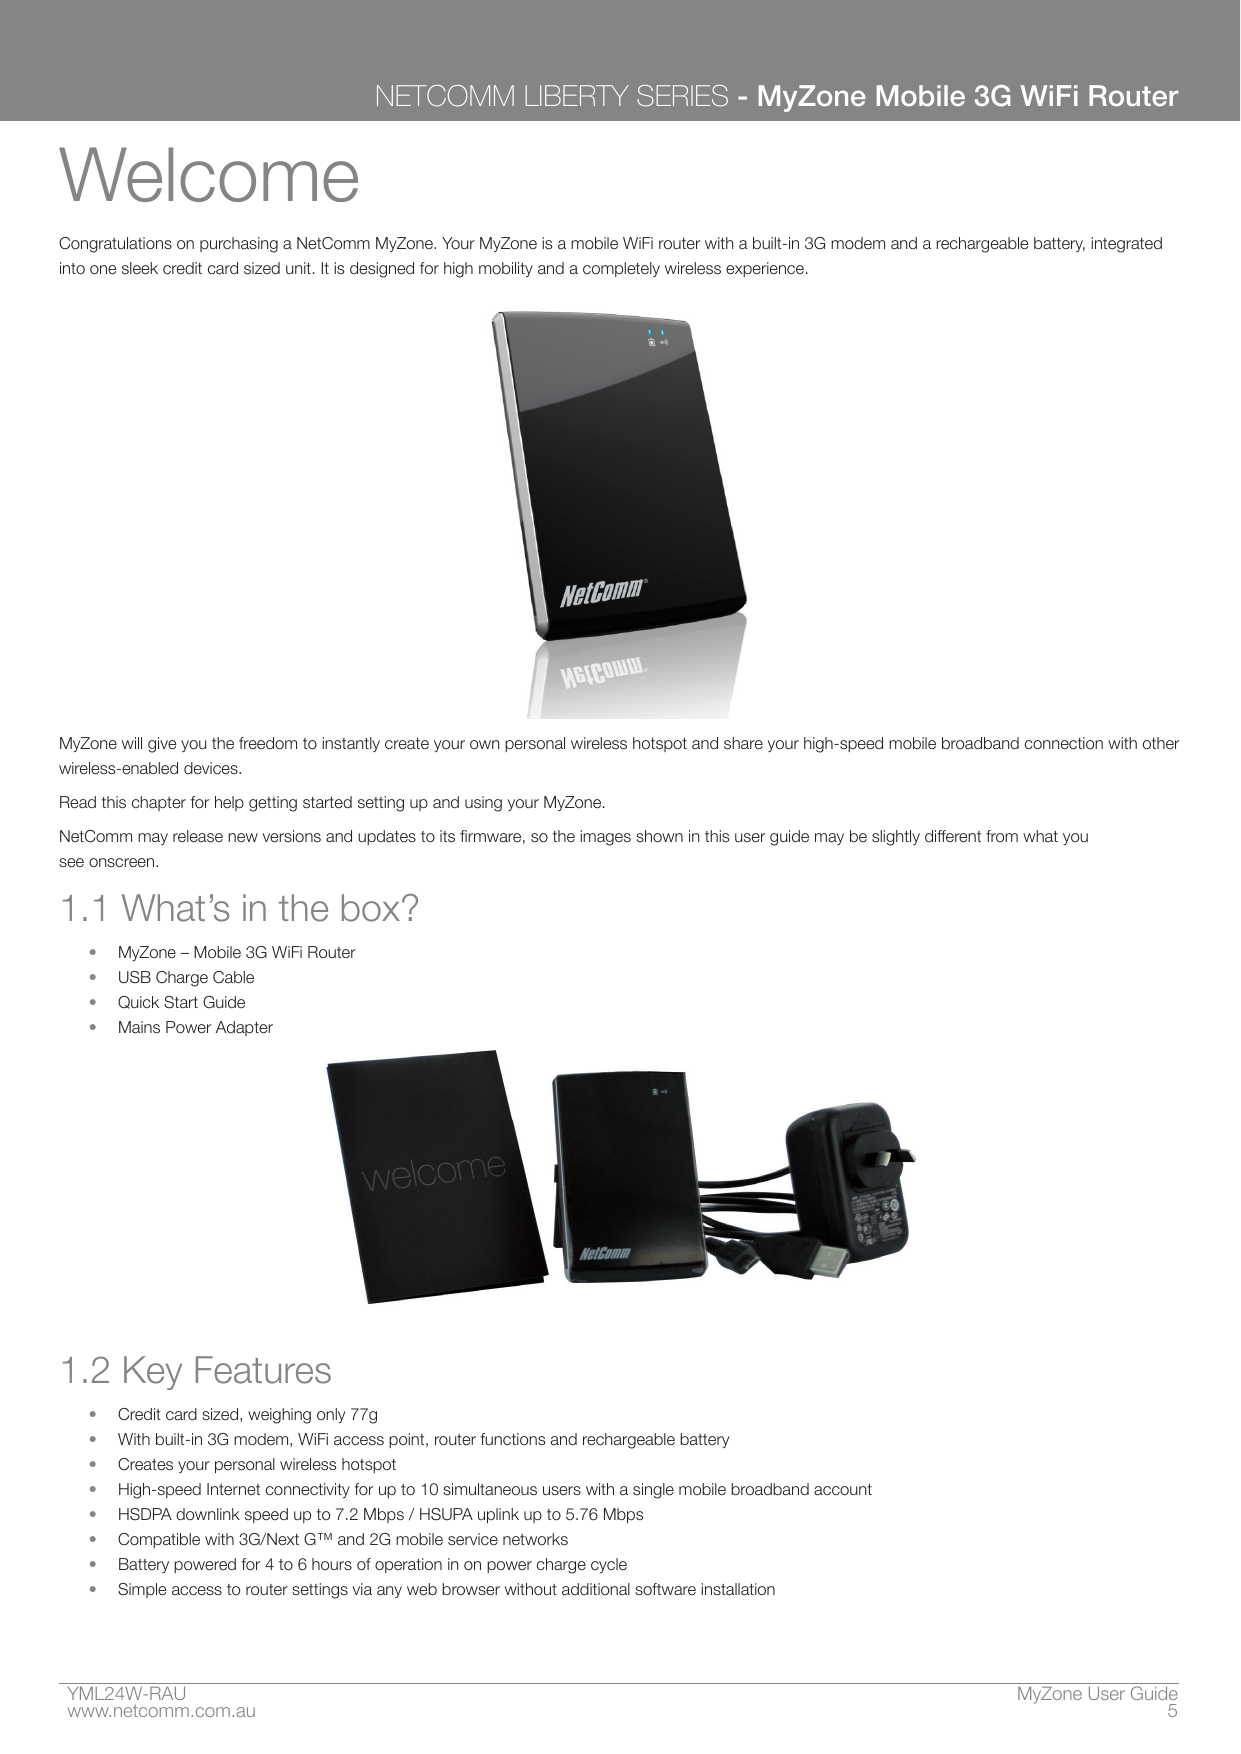 YML24W-RAU    MyZone User Guidewww.netcomm.com.au  5NETCOMM LIBERTY SERIES - MyZone Mobile 3G WiFi RouterWelcomeCongratulations on purchasing a NetComm MyZone. Your MyZone is a mobile WiFi router with a built-in 3G modem and a rechargeable battery, integrated into one sleek credit card sized unit. It is designed for high mobility and a completely wireless experience.MyZone will give you the freedom to instantly create your own personal wireless hotspot and share your high-speed mobile broadband connection with other wireless-enabled devices.Read this chapter for help getting started setting up and using your MyZone.NetComm may release new versions and updates to its rmware, so the images shown in this user guide may be slightly different from what you  see onscreen.1.1 What’s in the box?•  MyZone – Mobile 3G WiFi Router•  USB Charge Cable• Quick Start Guide•  Mains Power Adapter1.2 Key Features•  Credit card sized, weighing only 77g•  With built-in 3G modem, WiFi access point, router functions and rechargeable battery•  Creates your personal wireless hotspot•  High-speed Internet connectivity for up to 10 simultaneous users with a single mobile broadband account•  HSDPA downlink speed up to 7.2 Mbps / HSUPA uplink up to 5.76 Mbps•  Compatible with 3G/Next G™ and 2G mobile service networks•  Battery powered for 4 to 6 hours of operation in on power charge cycle•  Simple access to router settings via any web browser without additional software installation